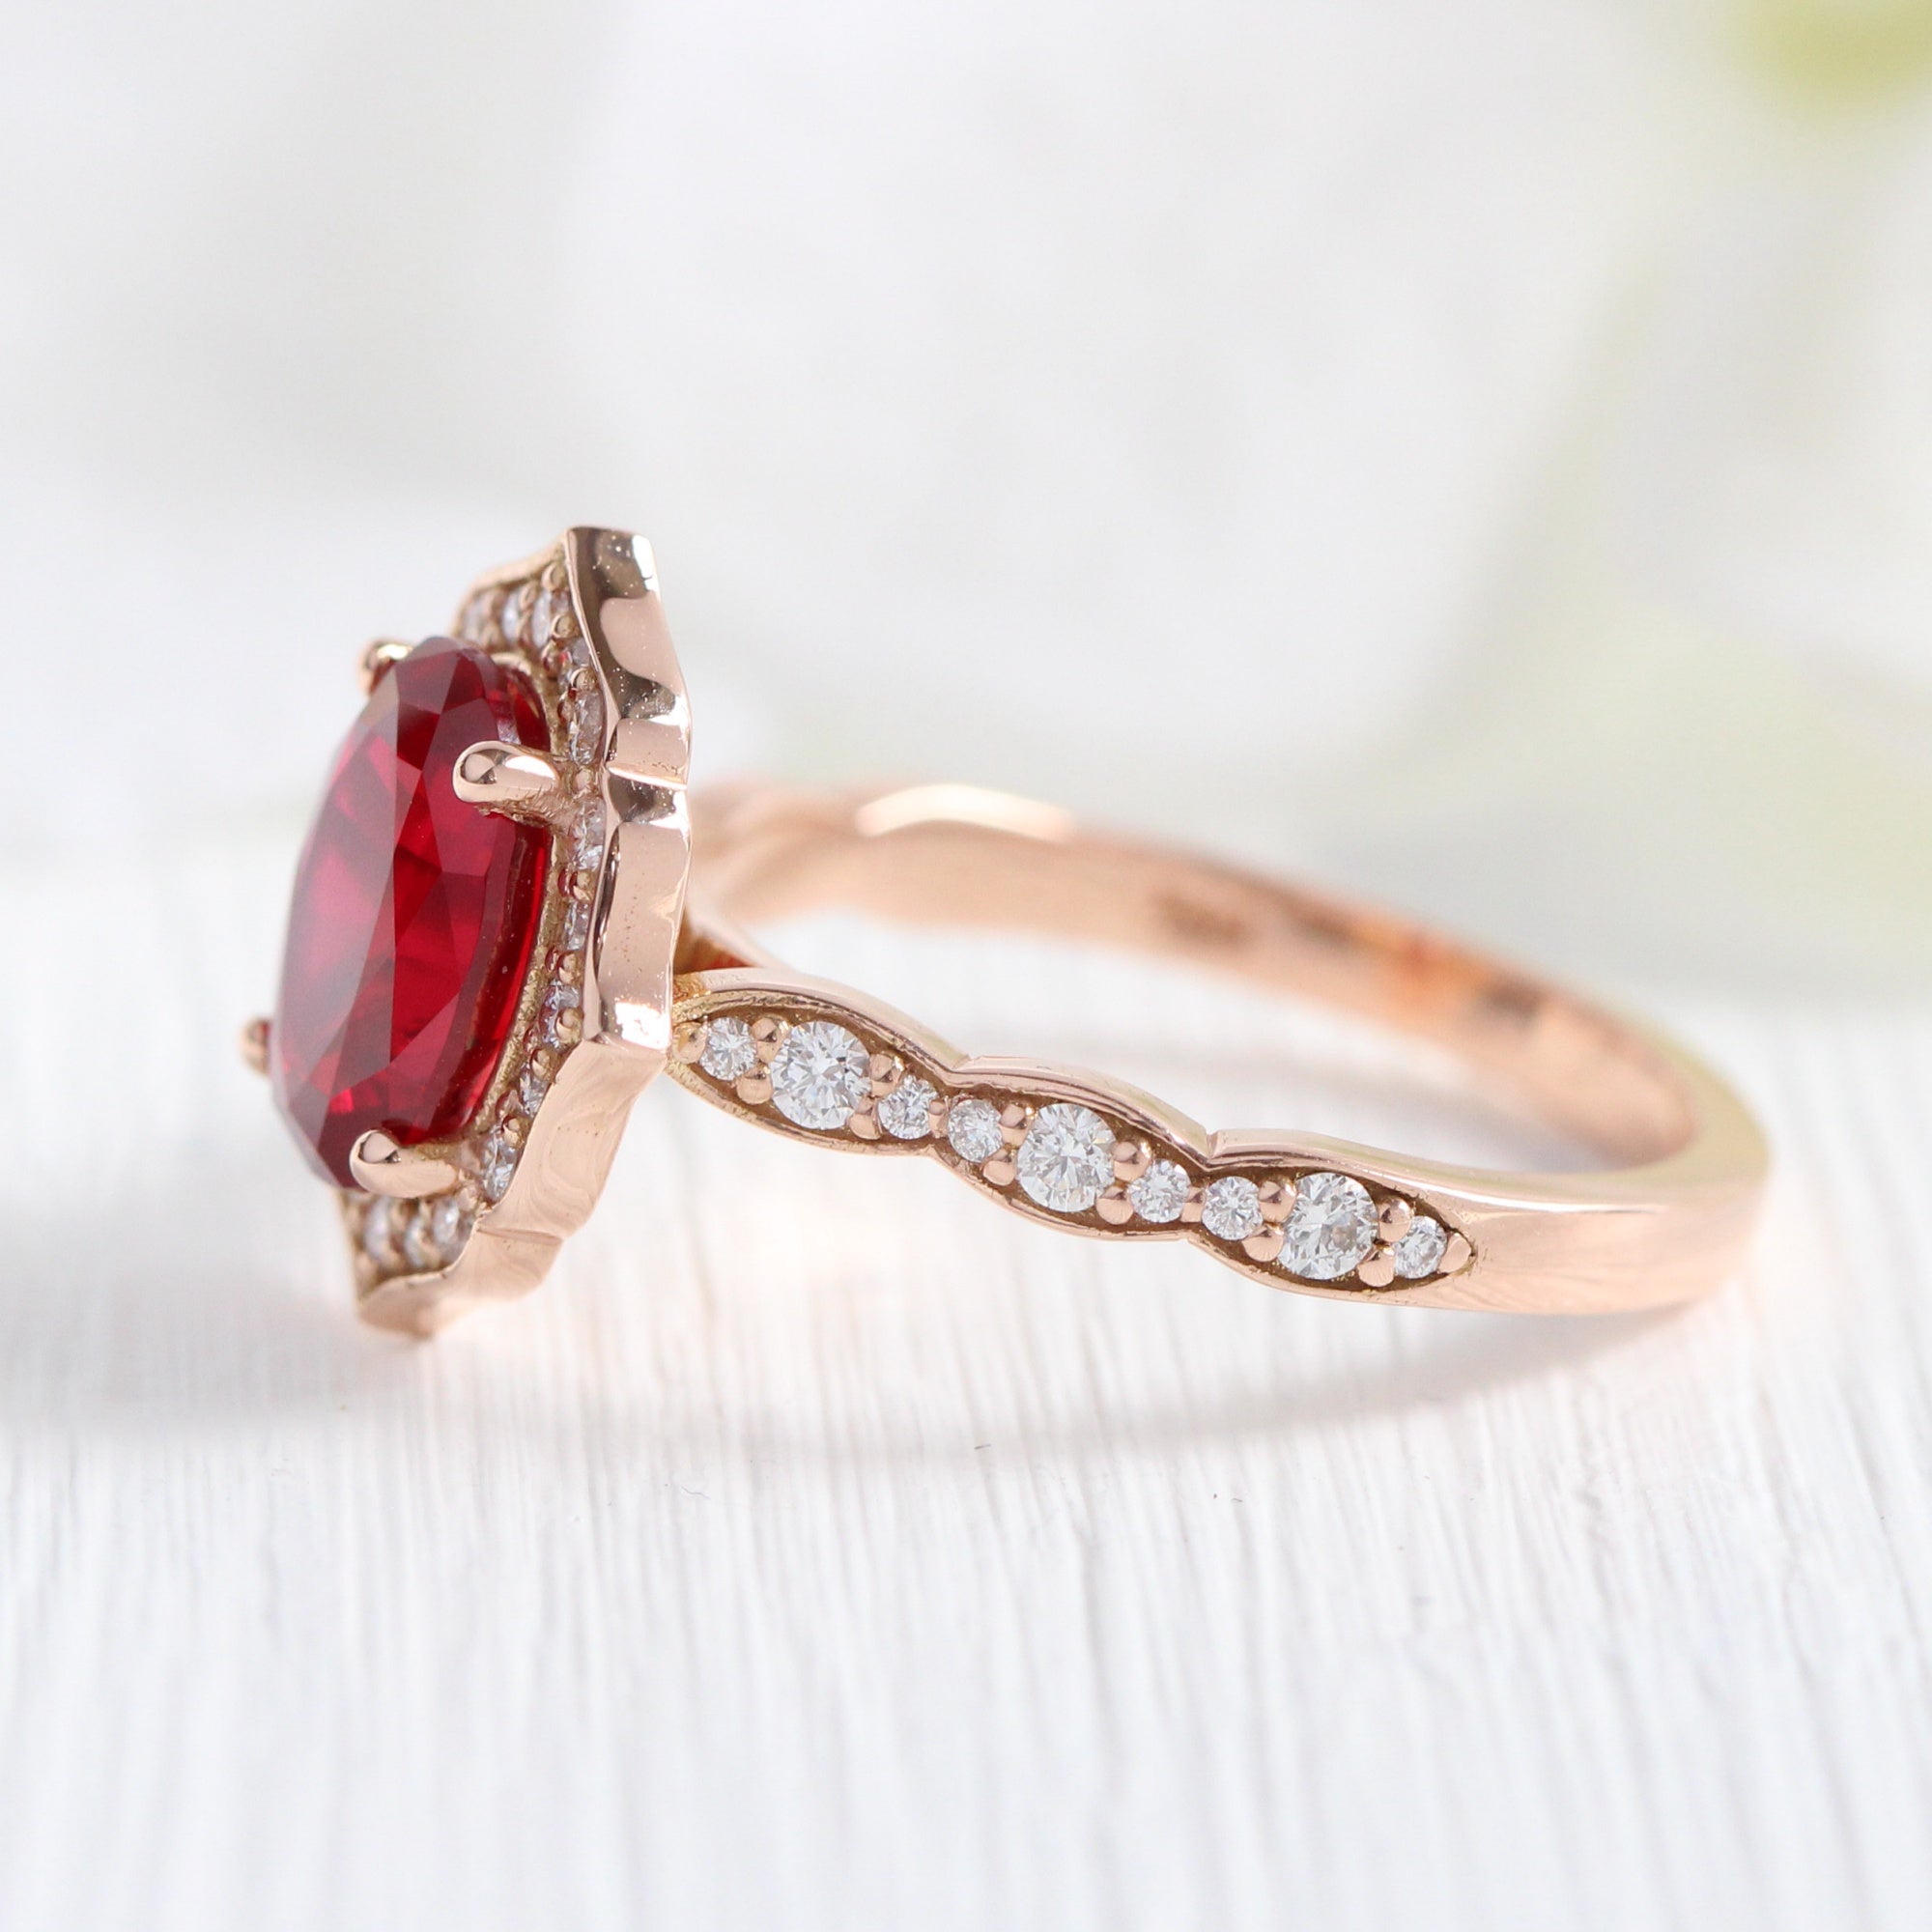 Large ruby engagement ring rose gold vintage halo diamond ruby ring la more design jewelry